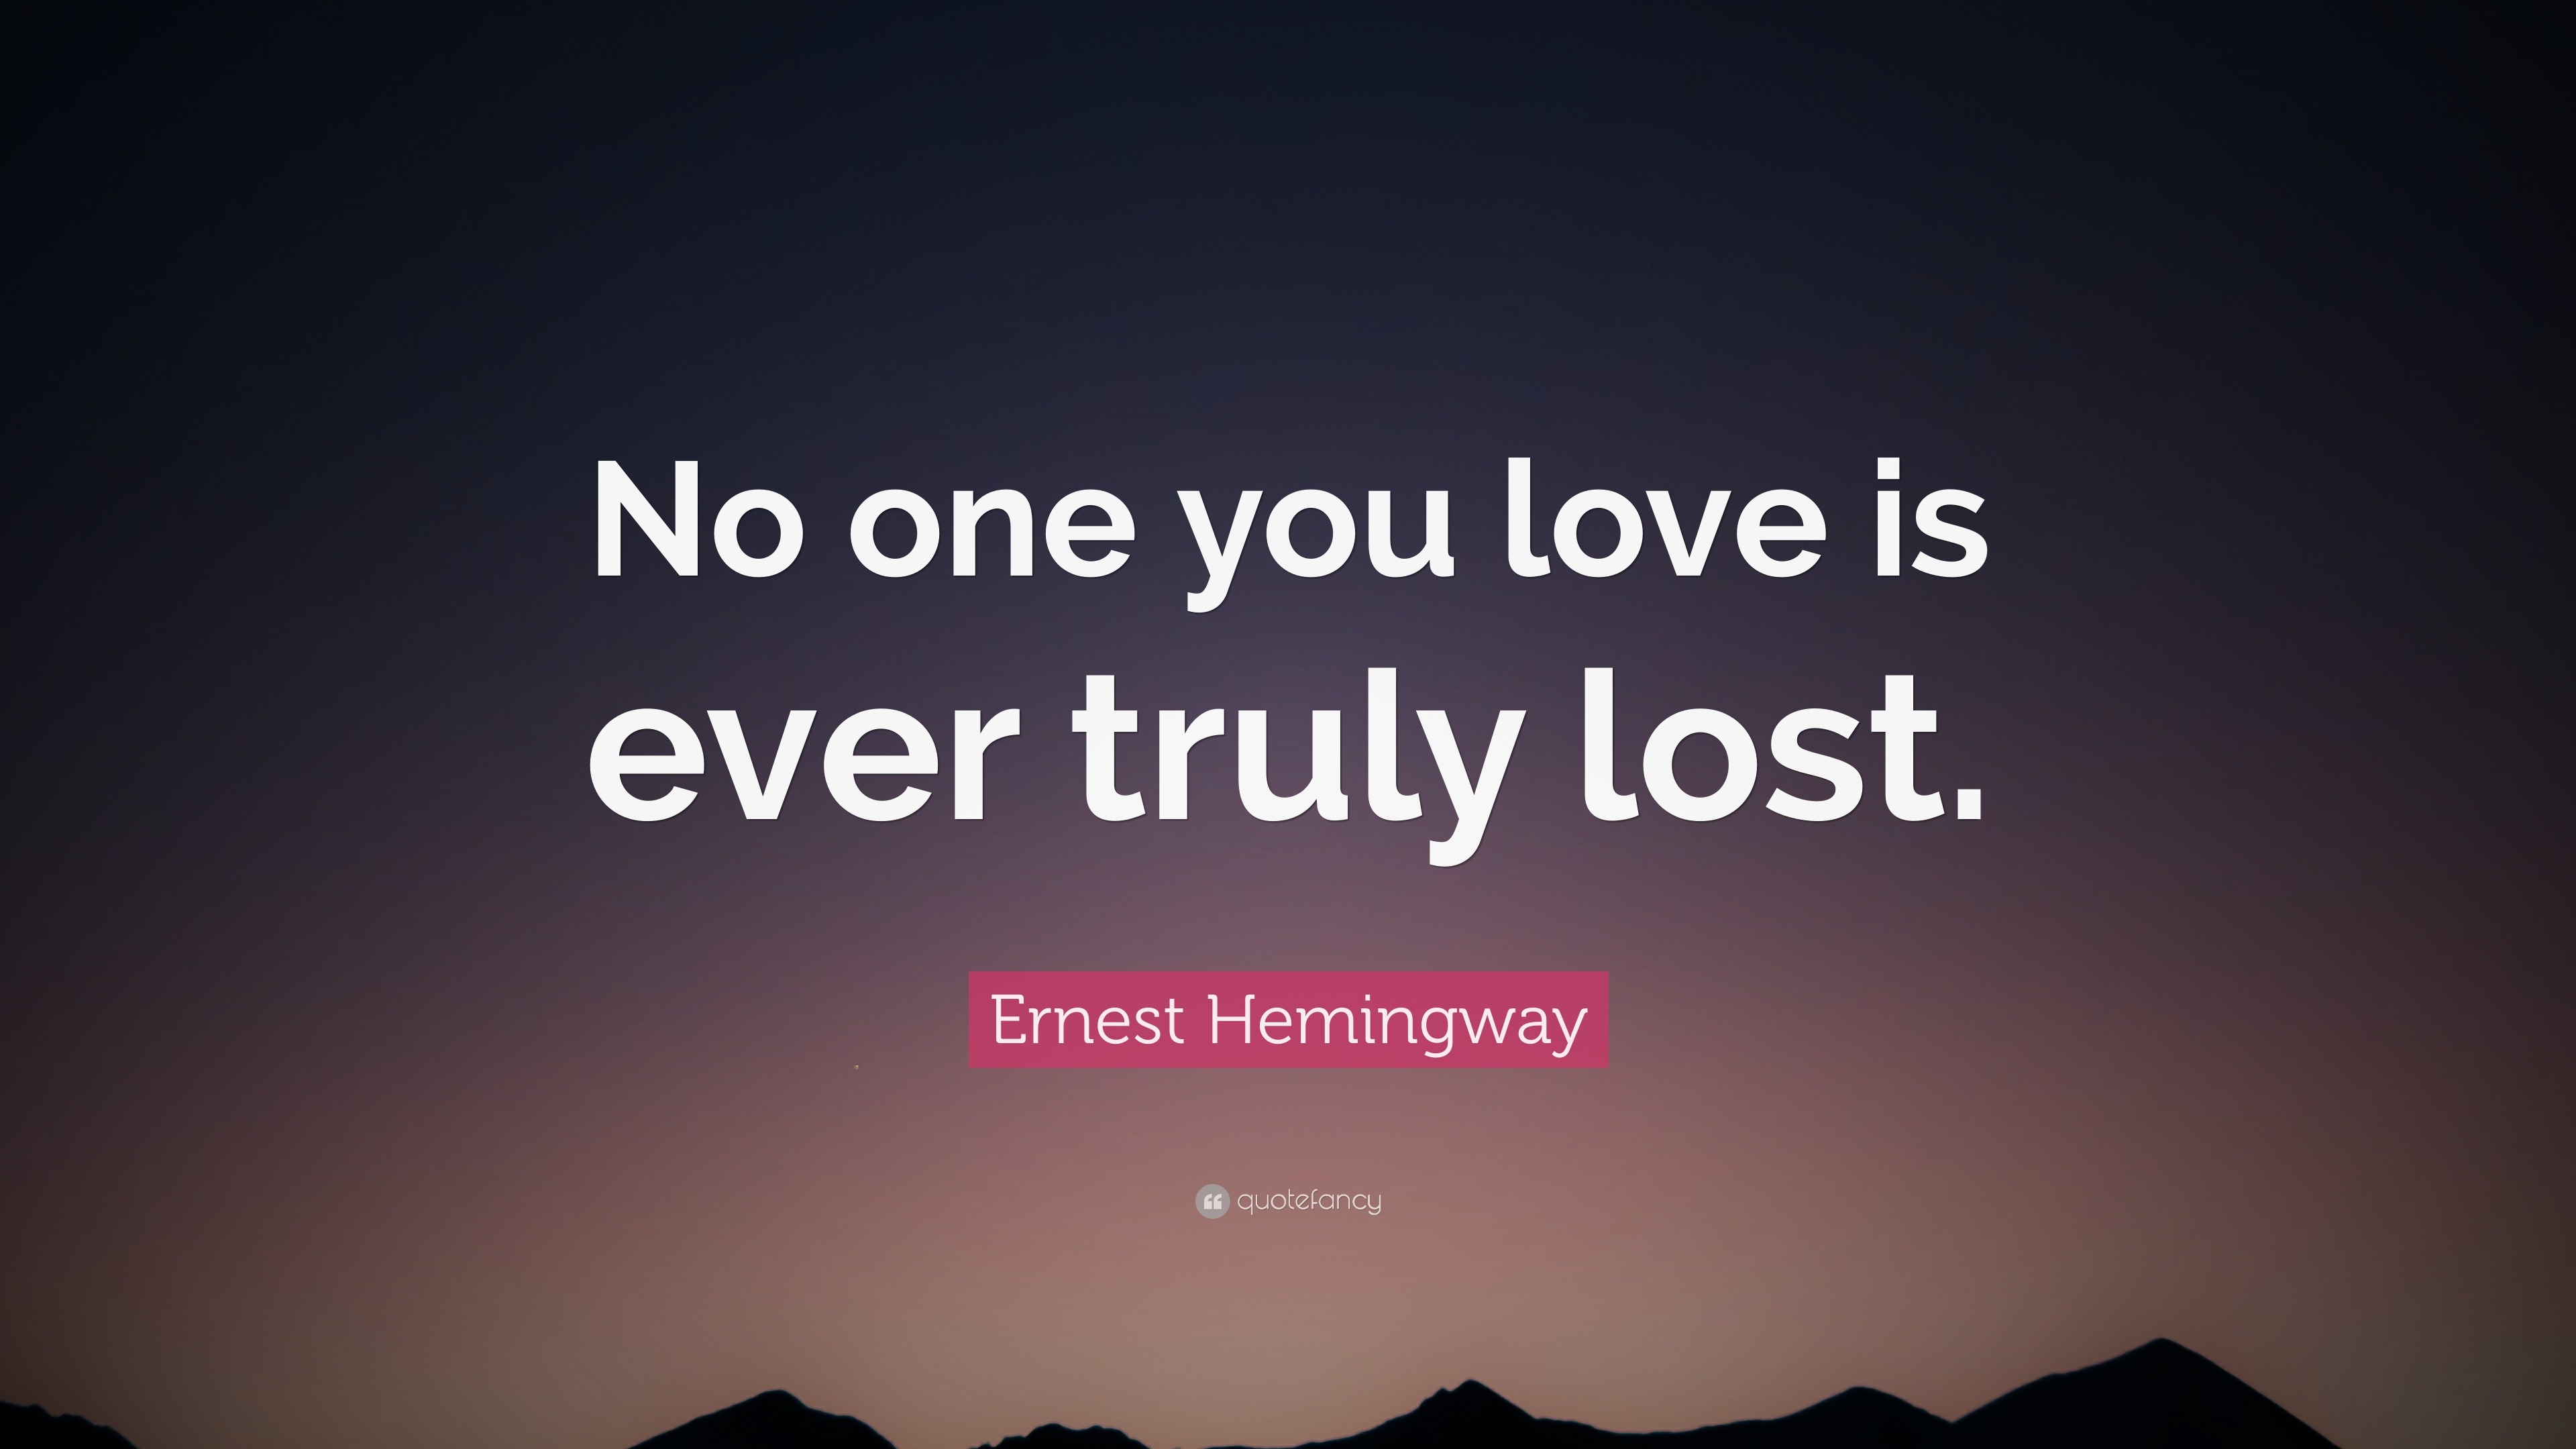 Ernest Hemingway Quote “No one you love is ever truly lost ”